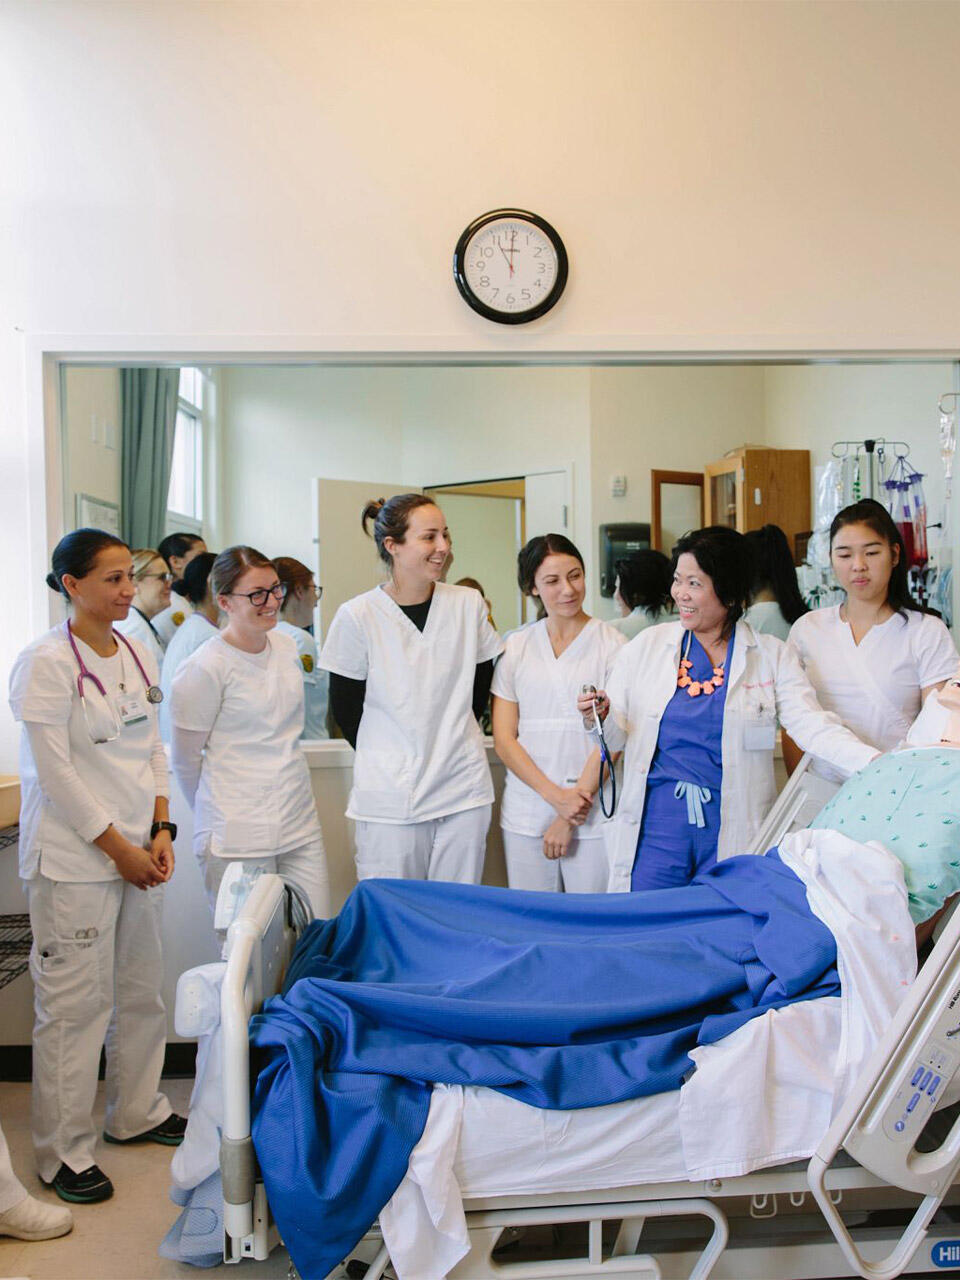 USF nursing students smiling in a lab